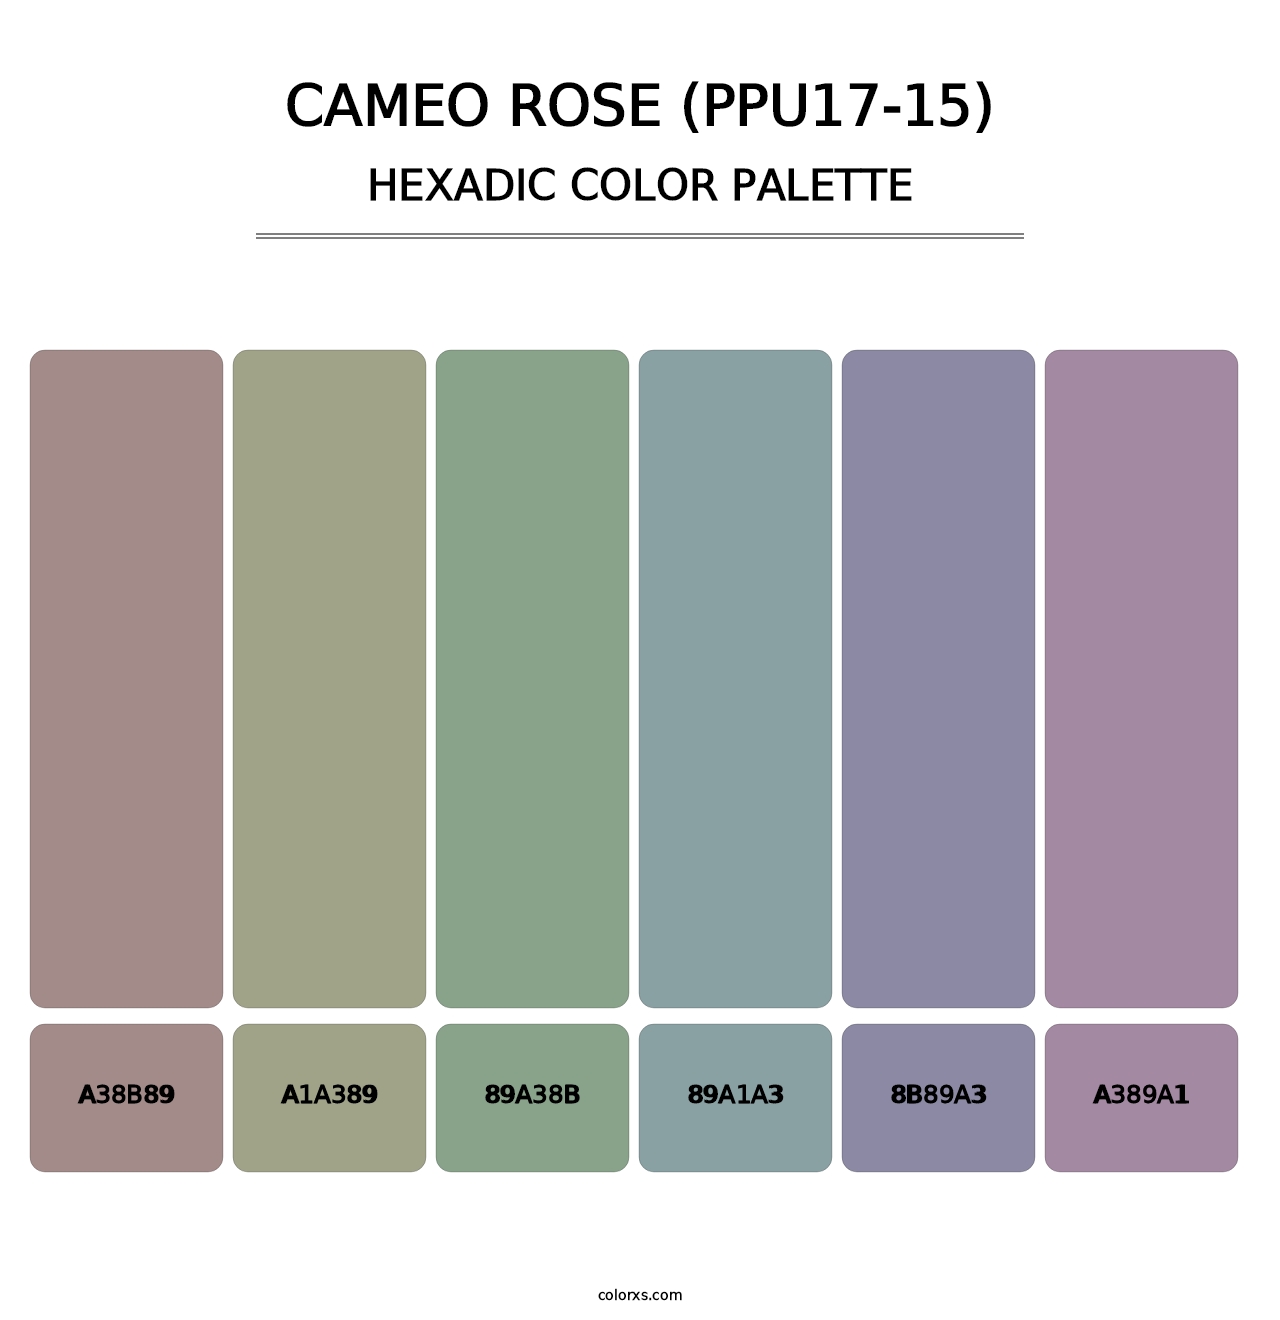 Cameo Rose (PPU17-15) - Hexadic Color Palette